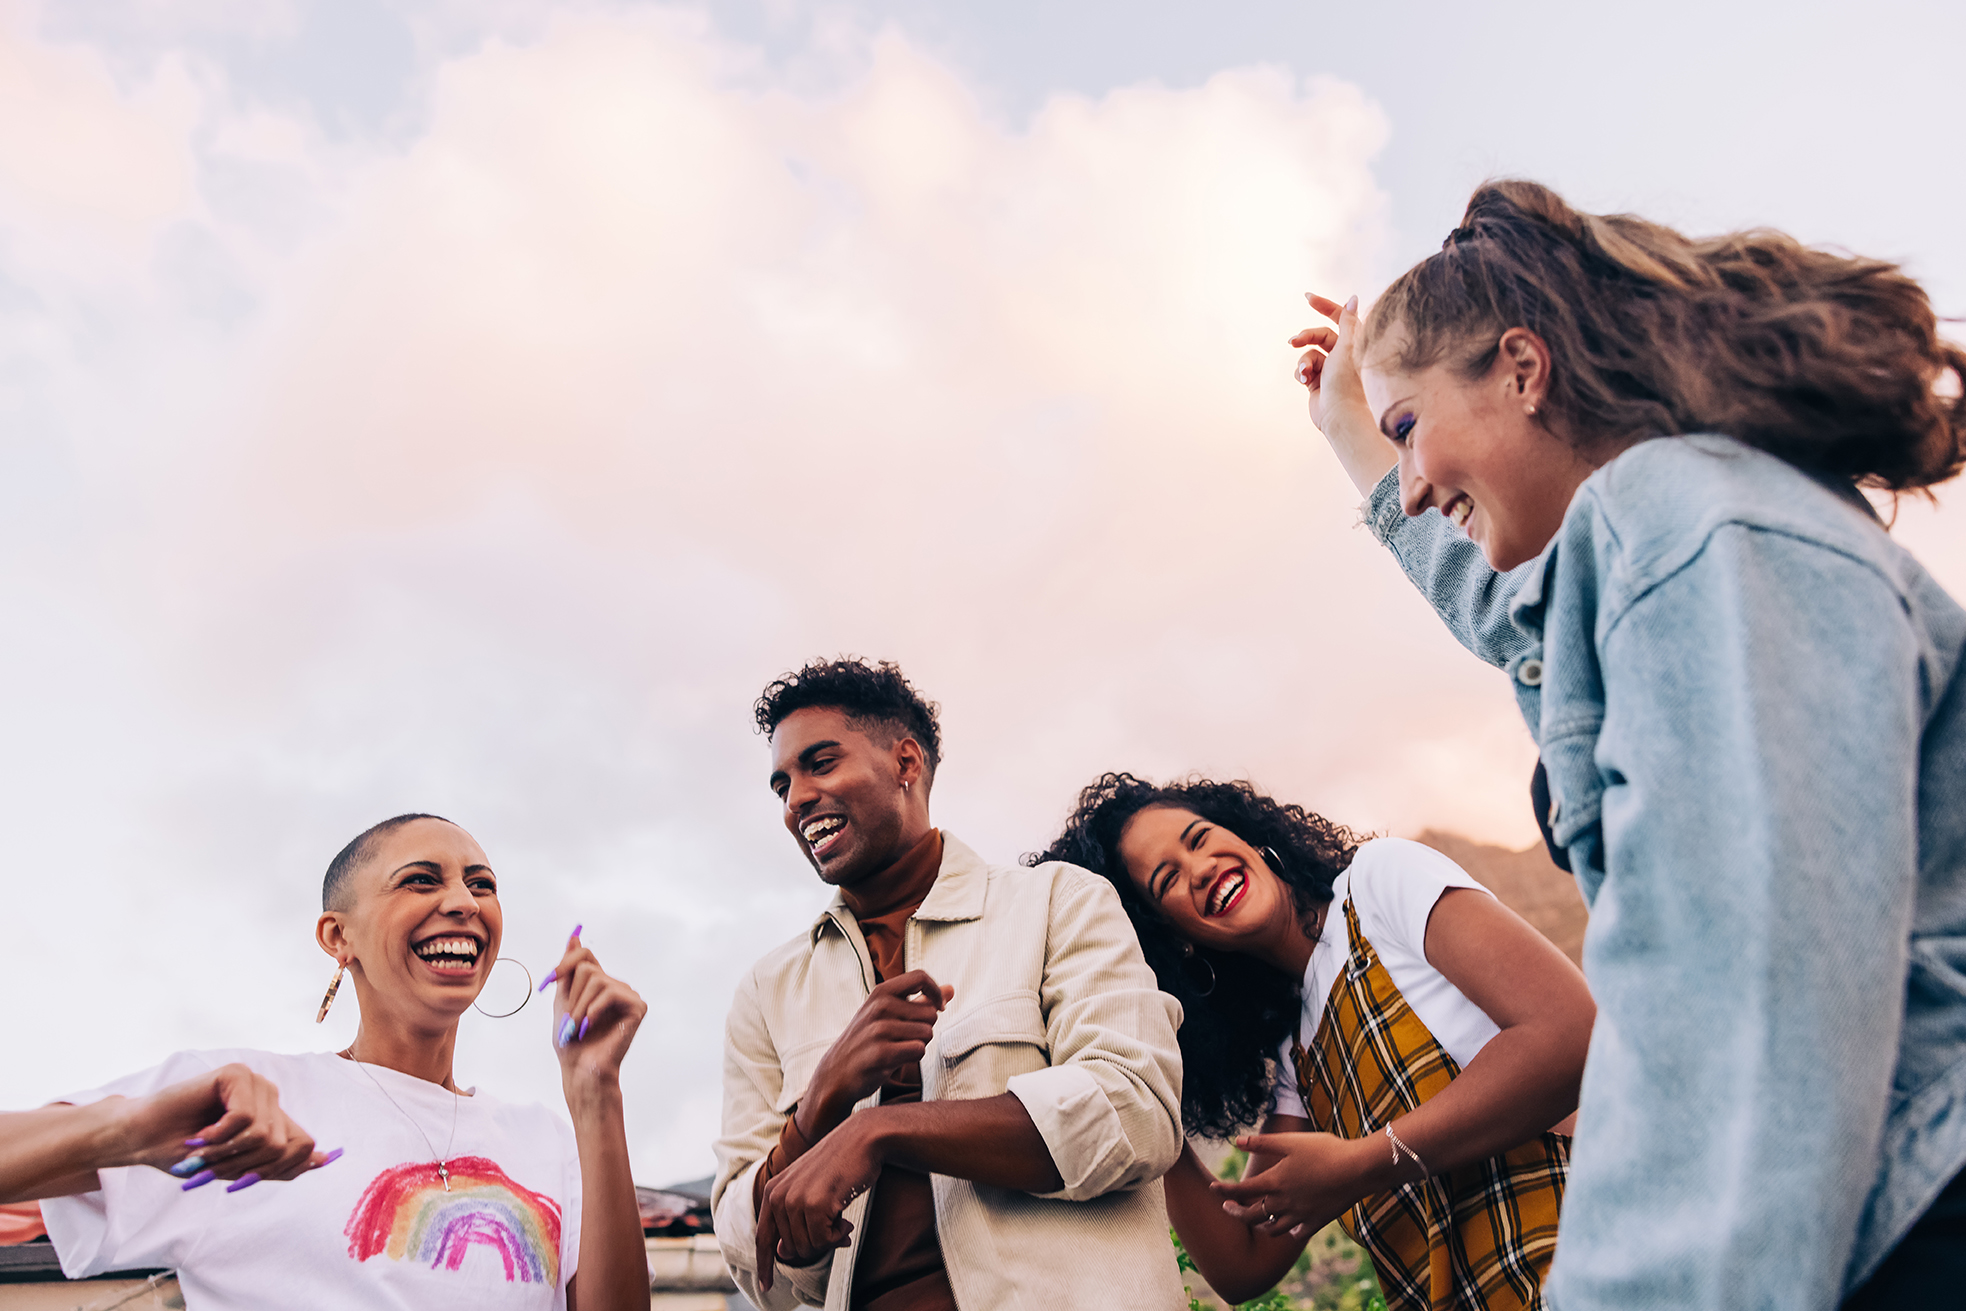 Marketing To Gen Z: How To Do It The Right Way